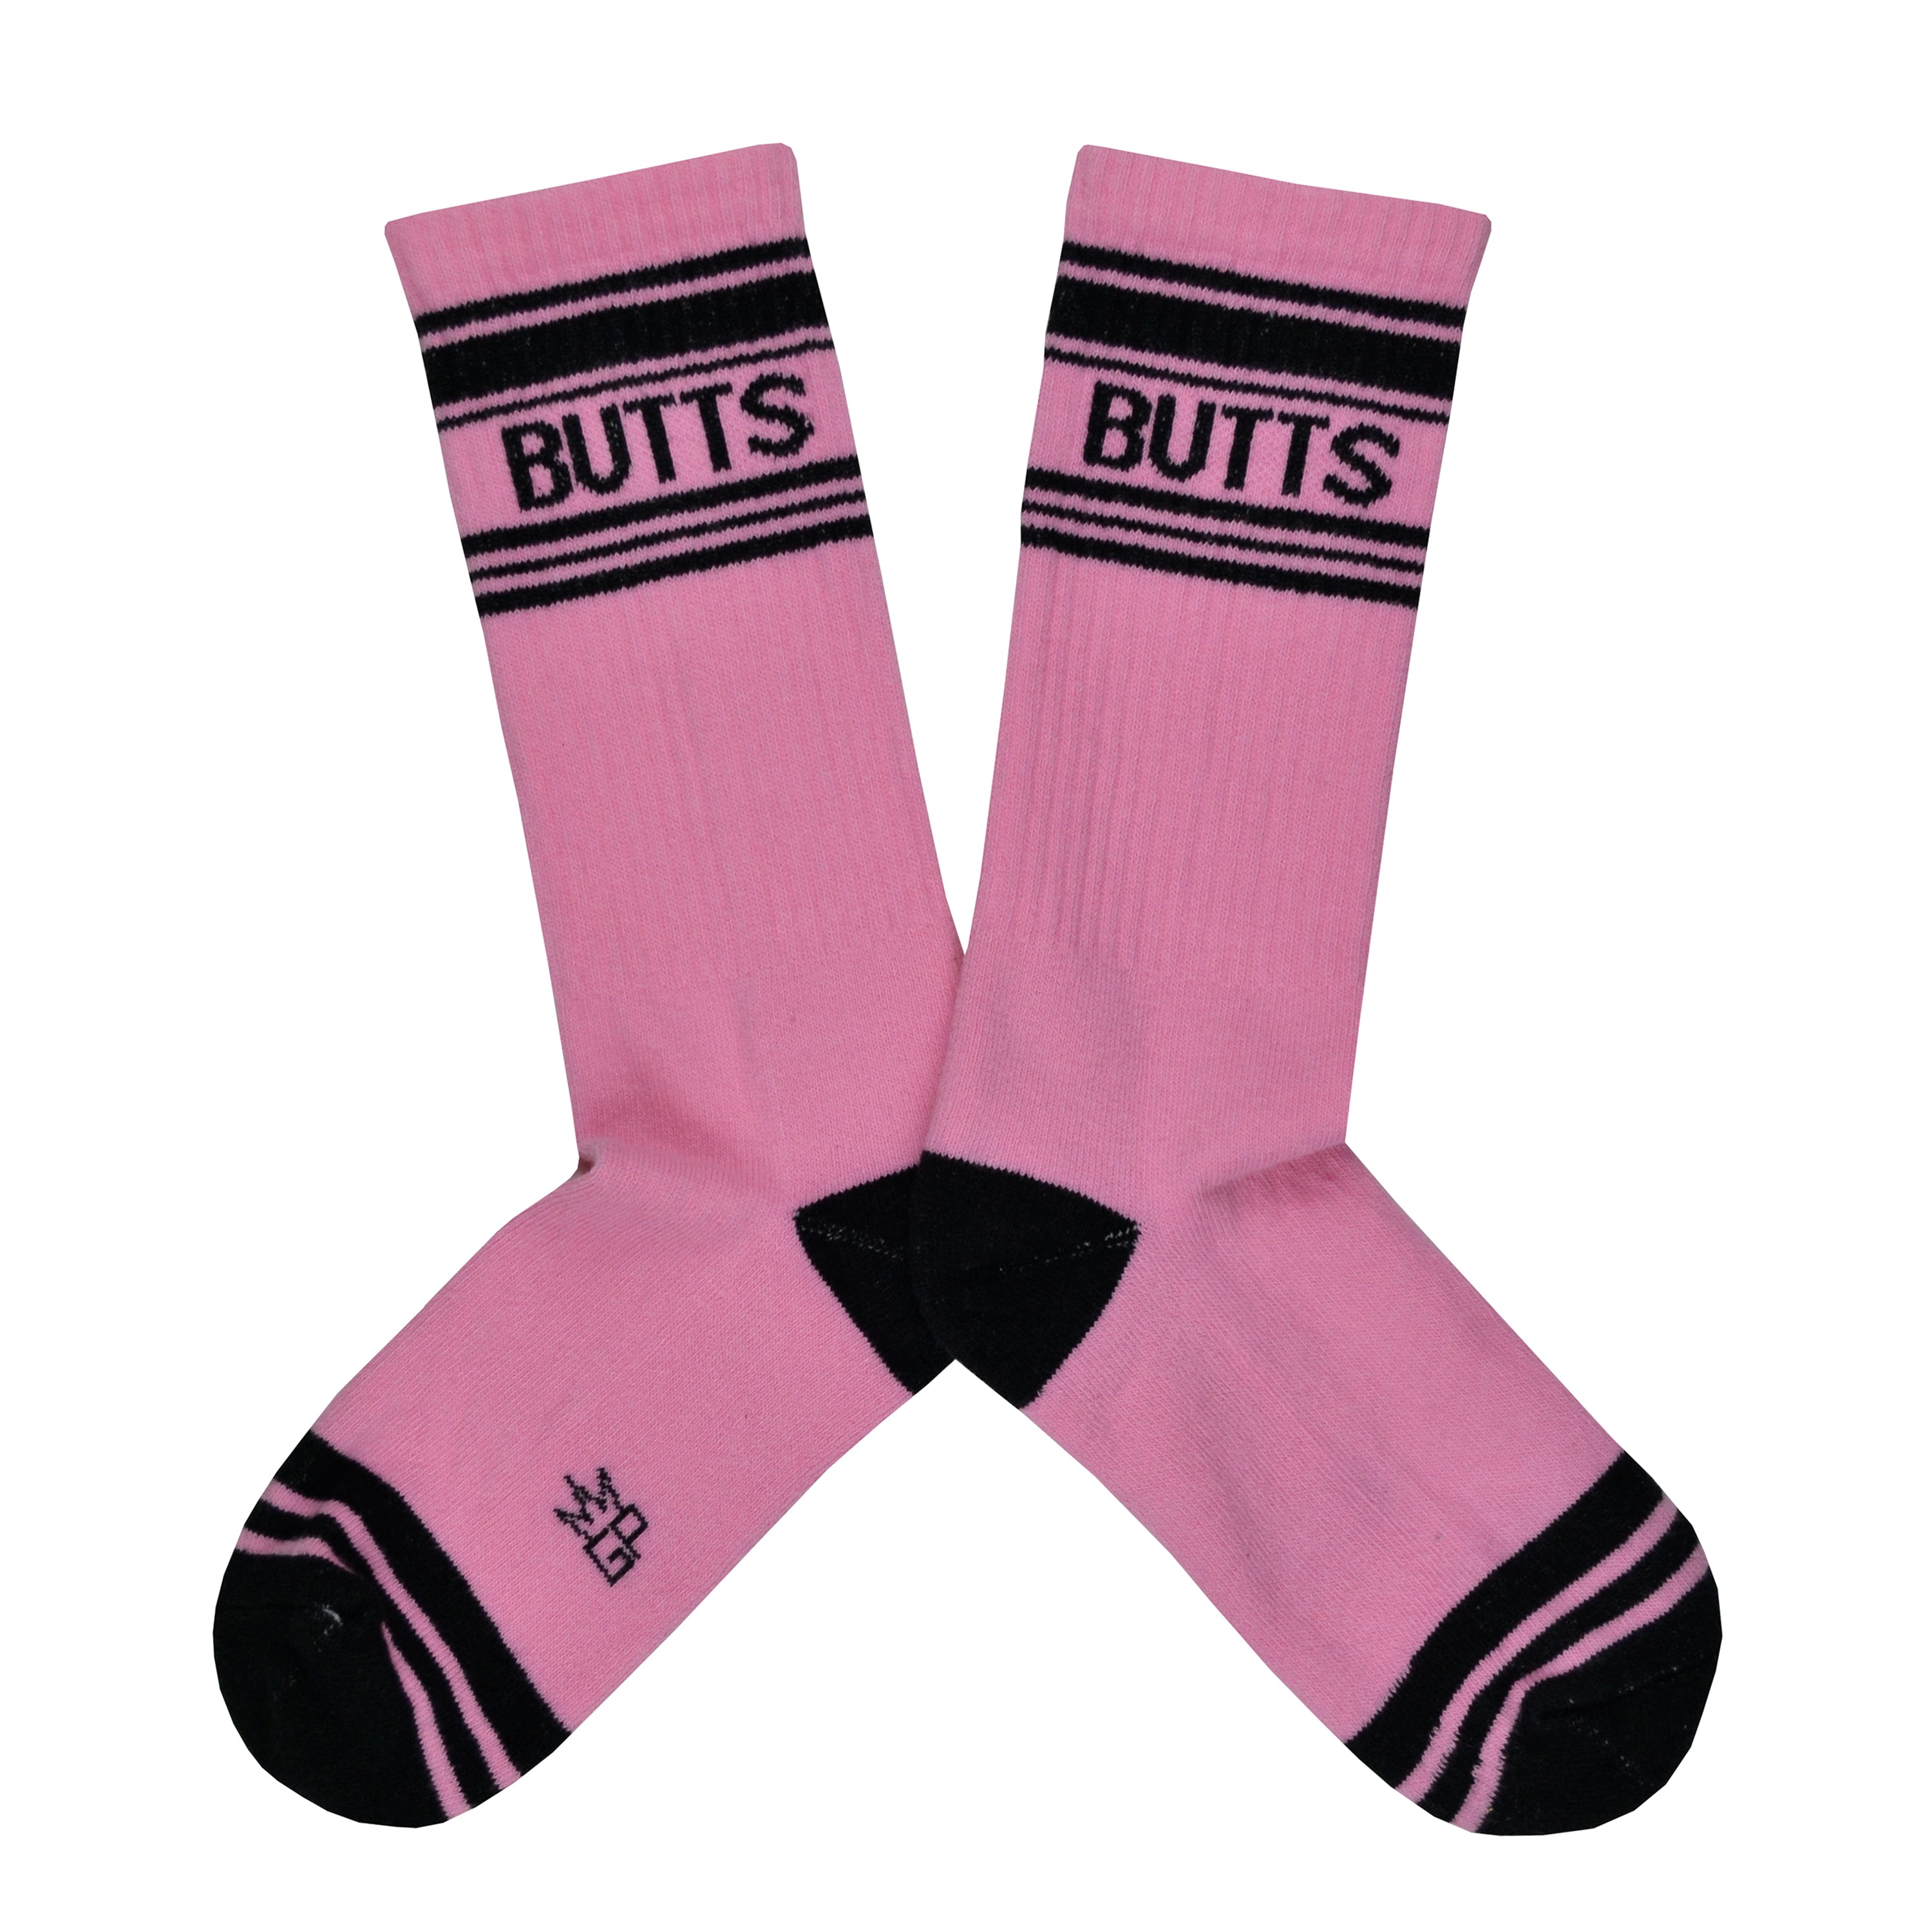 These pink cotton unisex crew socks with a black striped toe and cuff by the brand Gumball Poodle feature the word 